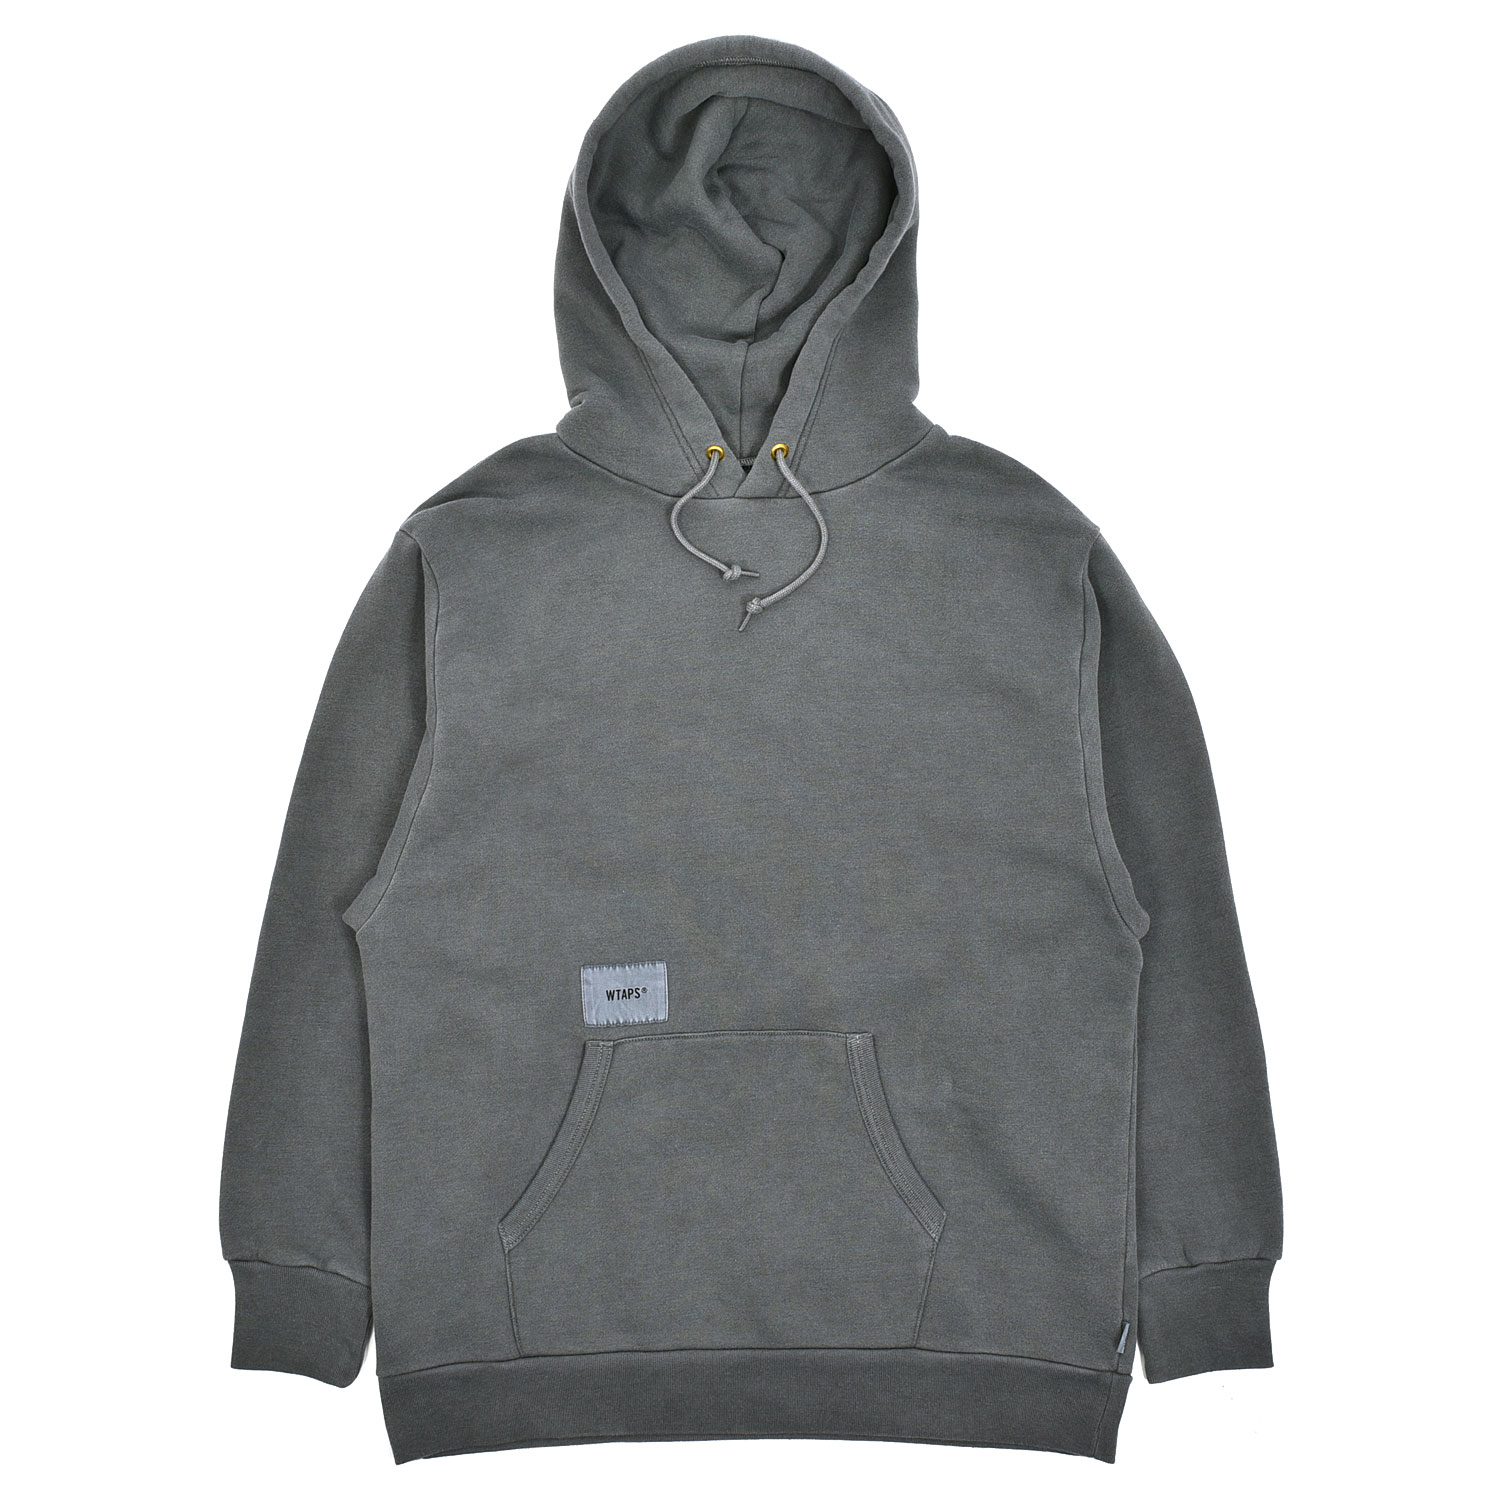 BLANK 01 / HOODED / COTTON WTAPS S レア 染 | nate-hospital.com